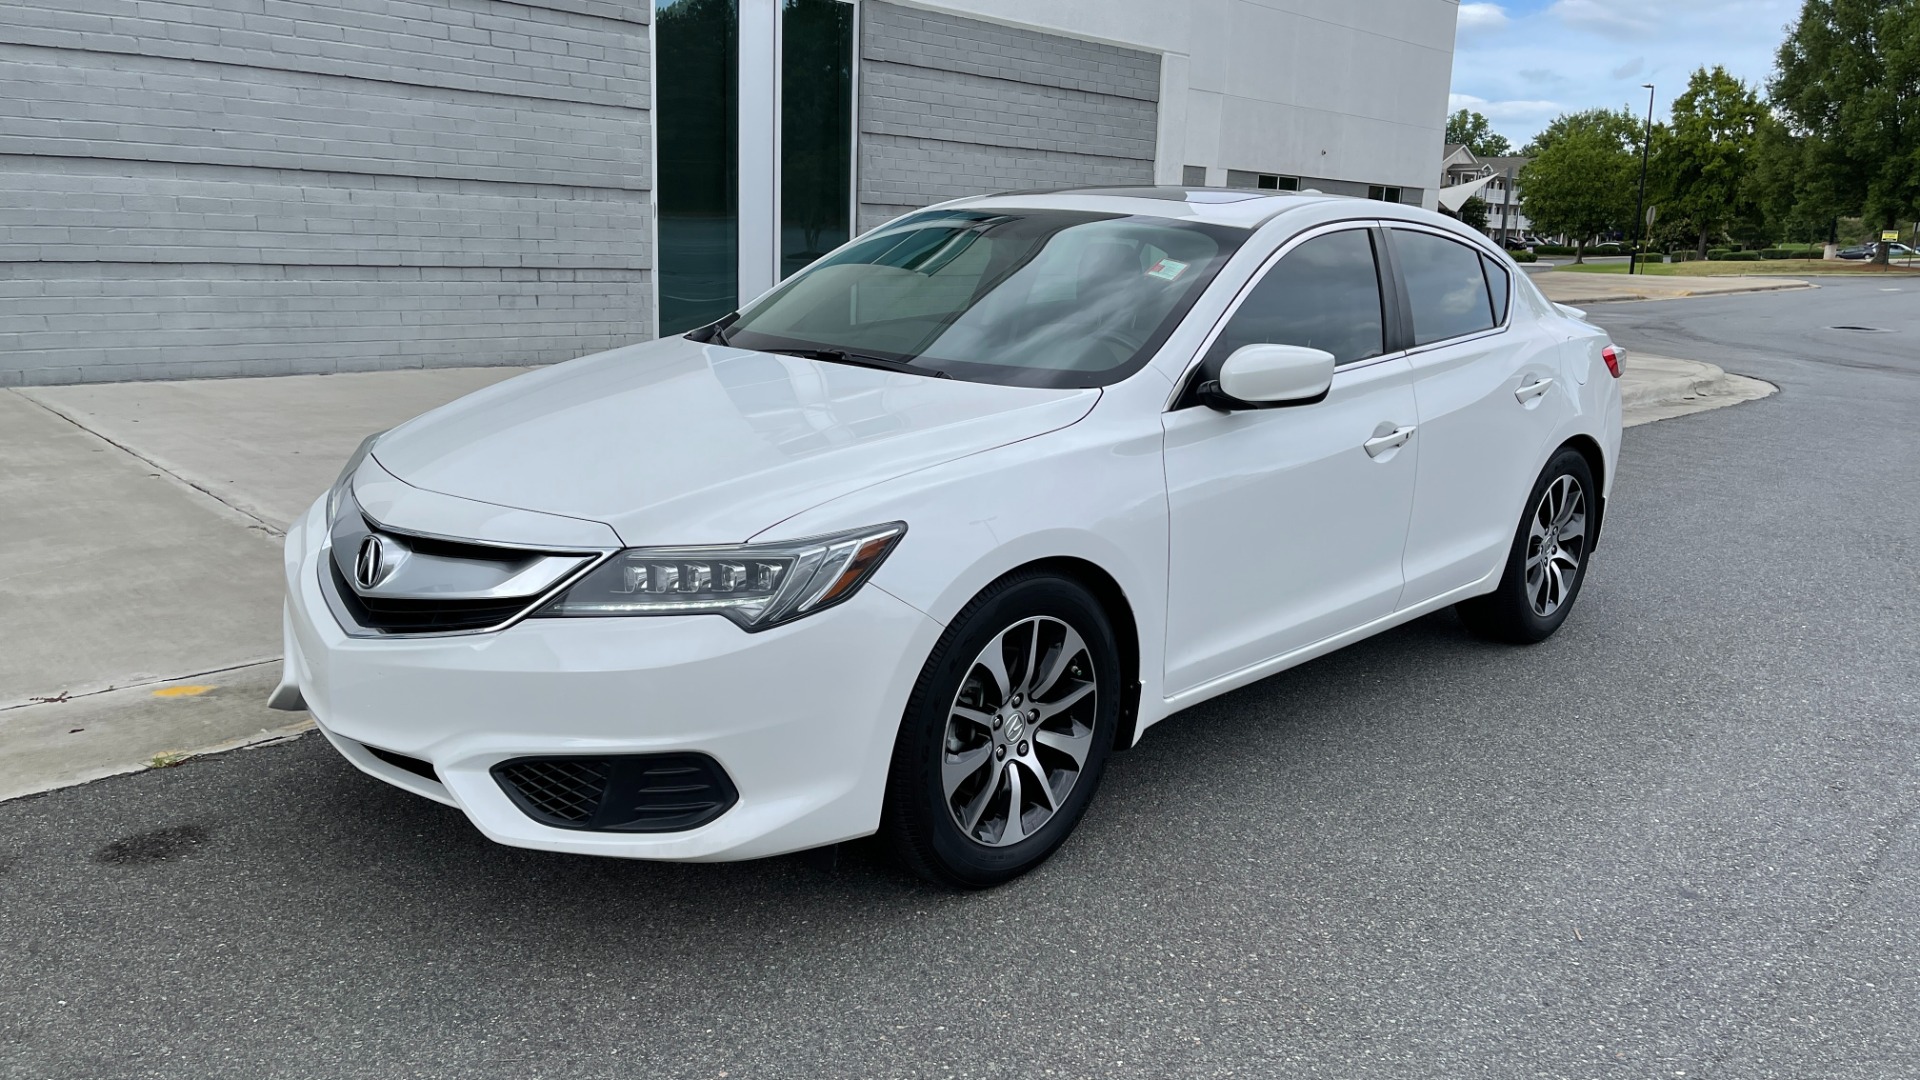 Used 2016 Acura ILX 4DR SEDAN / 2.4L I4 / FWD / STREAMING AUDIO / SUNROOF / REARVIEW for sale Sold at Formula Imports in Charlotte NC 28227 3